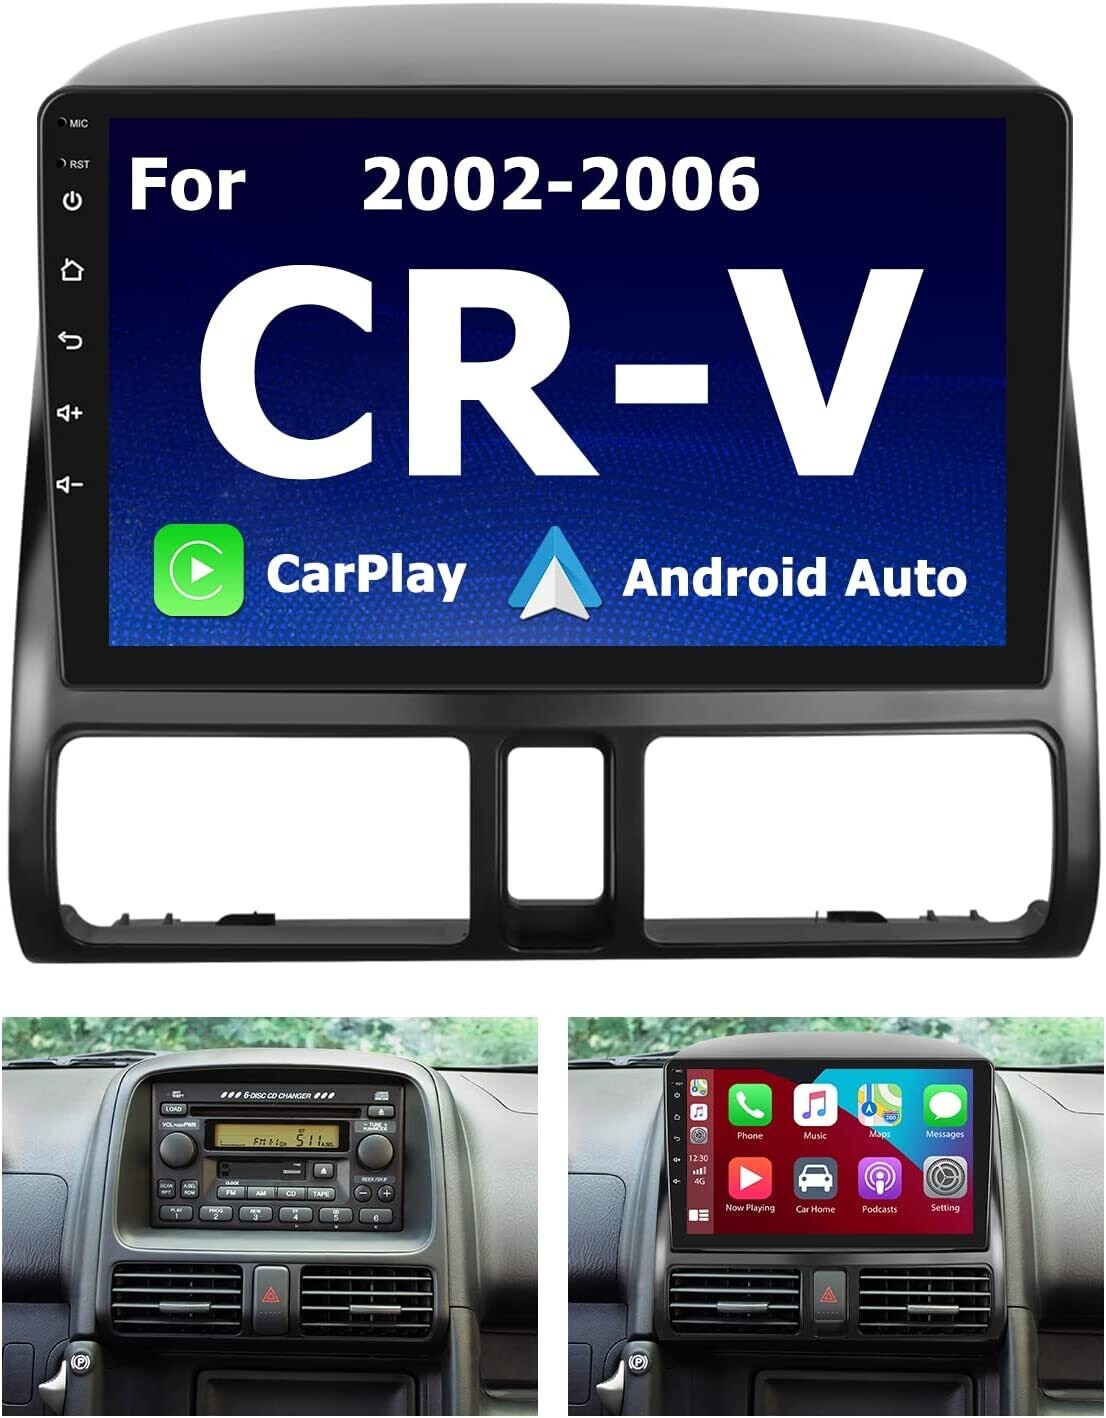 Honda CR-V CRV 2 Android touch screen smart custom car stereo radio 9 inch, with bluetooth, GPS, Android auto and Apple Carplay 2gb 32gb. 2002, 2003, 2004, 2005, 2006